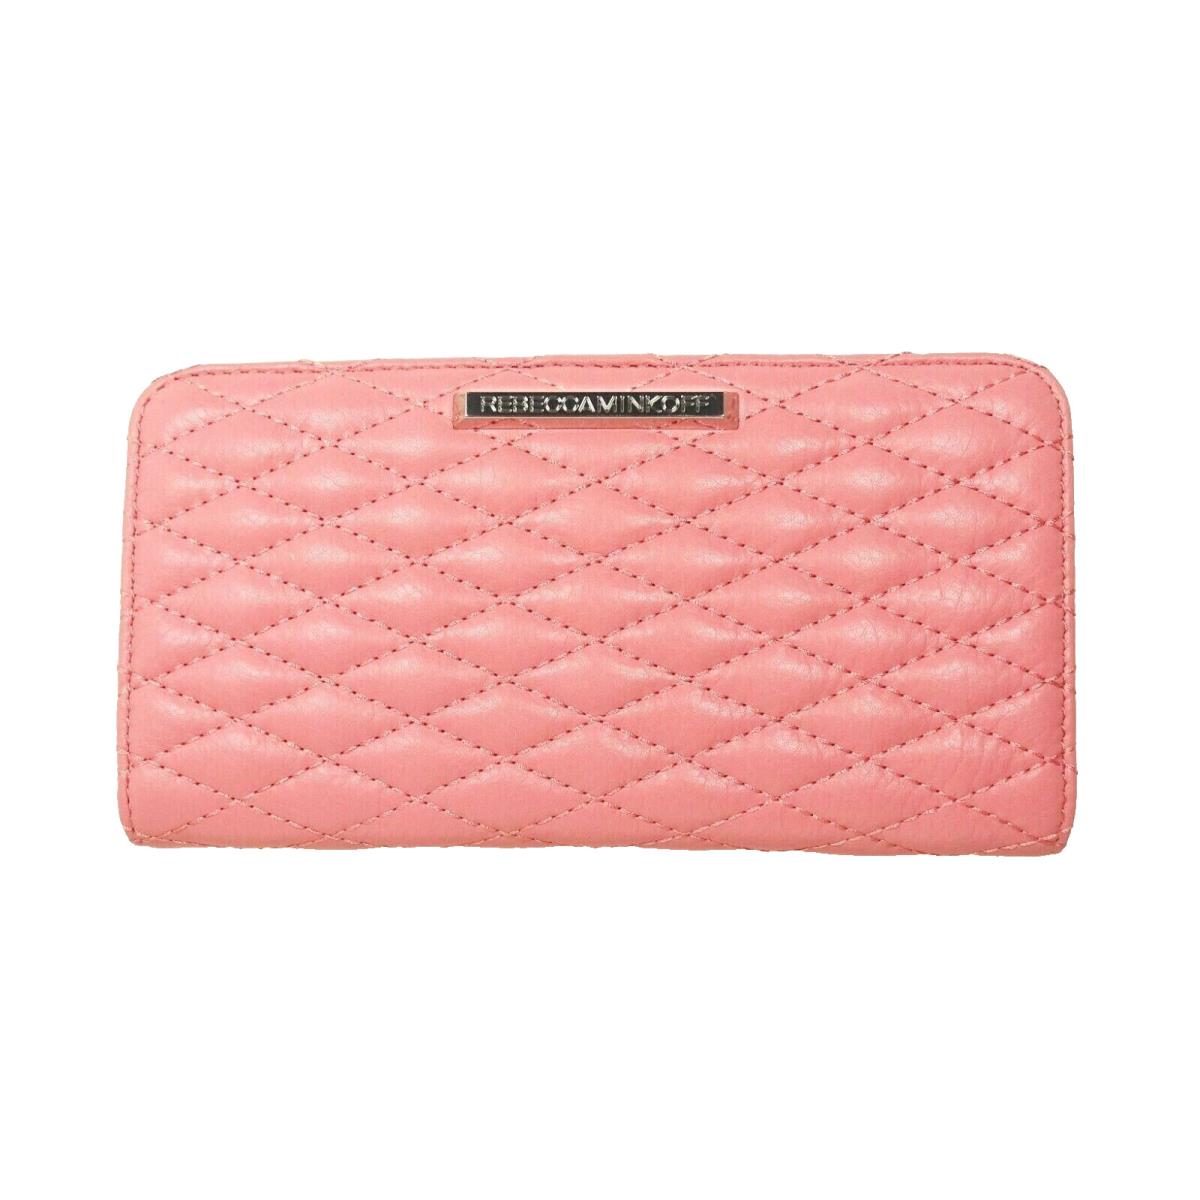 Marc Jacobs Rebecca Minkoff Sofie Guava Color Quilted Leather Bifold Wallet